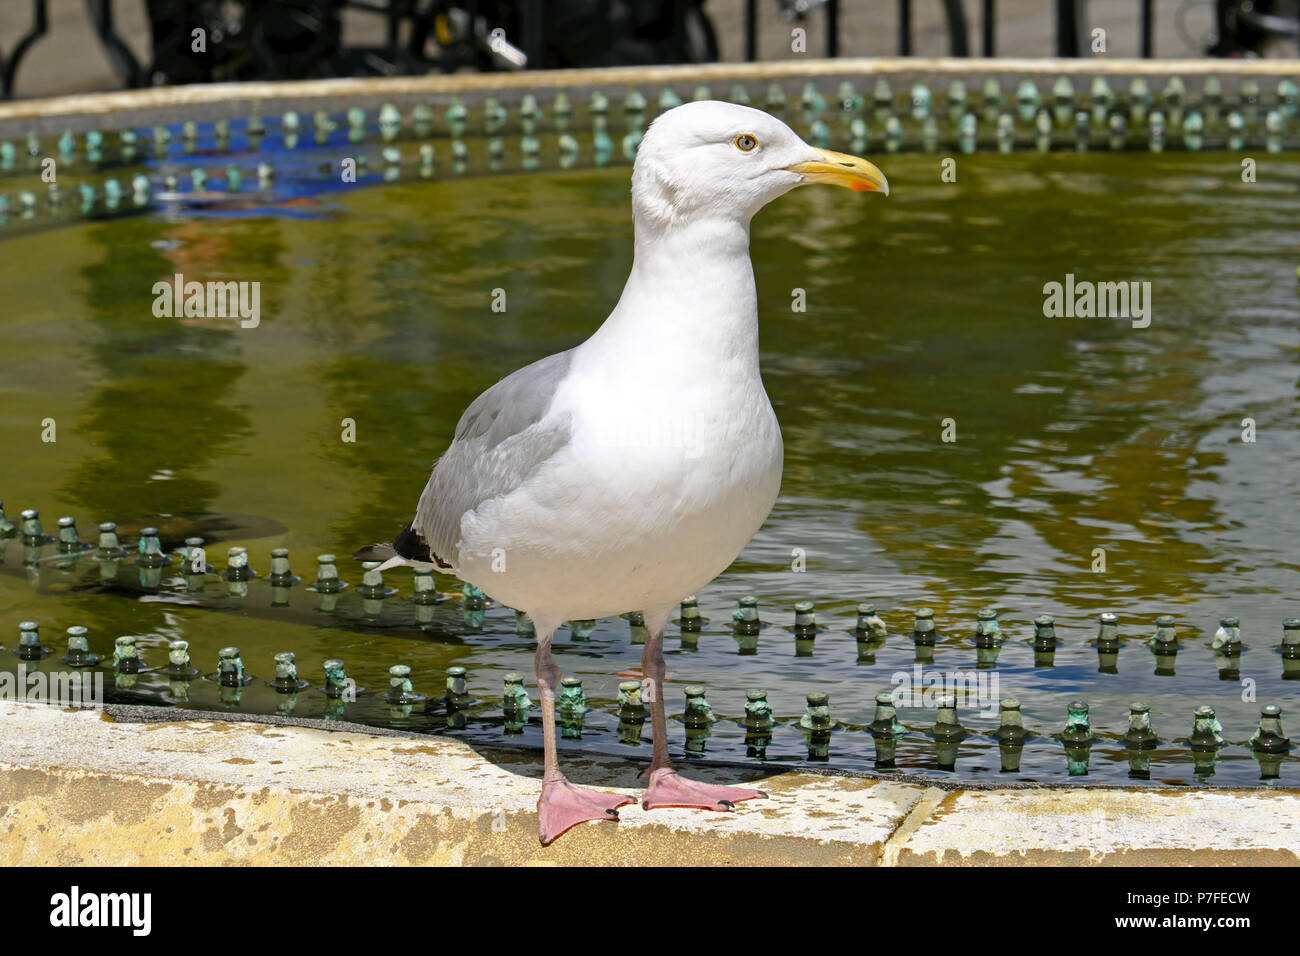 A herring gull (Larus argentatus) standing on a fountain outside City Hall in Bristol, UK Stock Photo